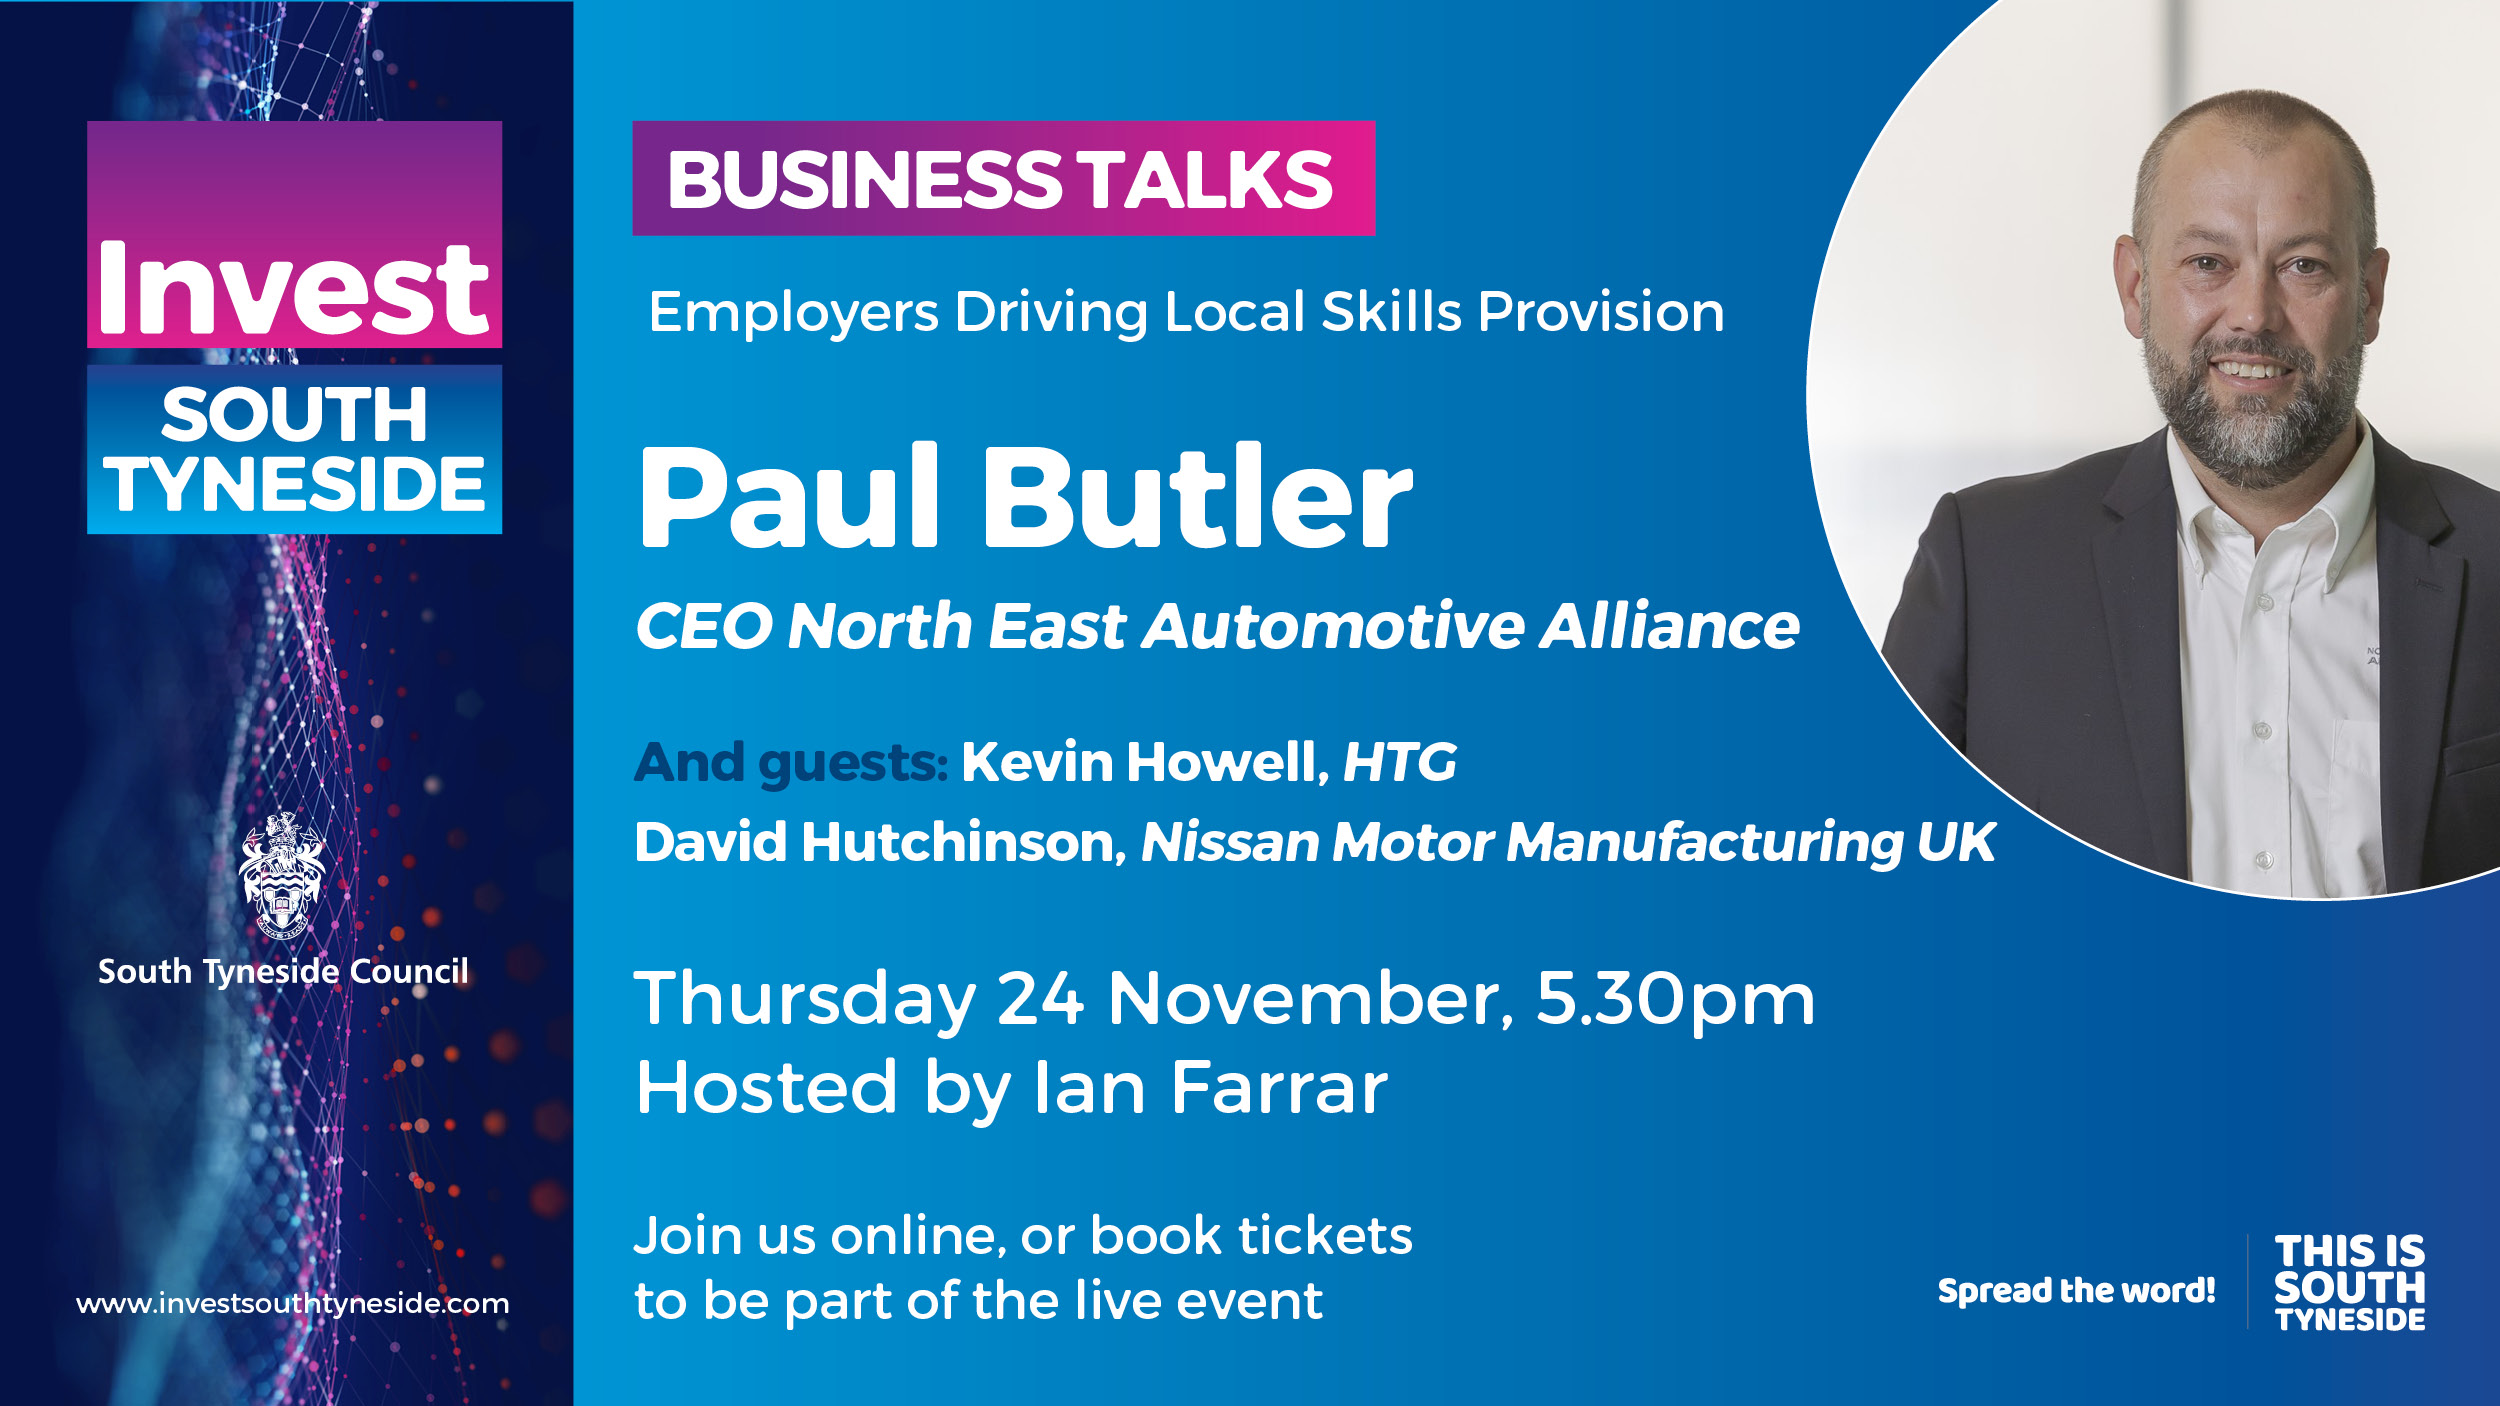 Business Talk: Employers Driving Local Skills Provision